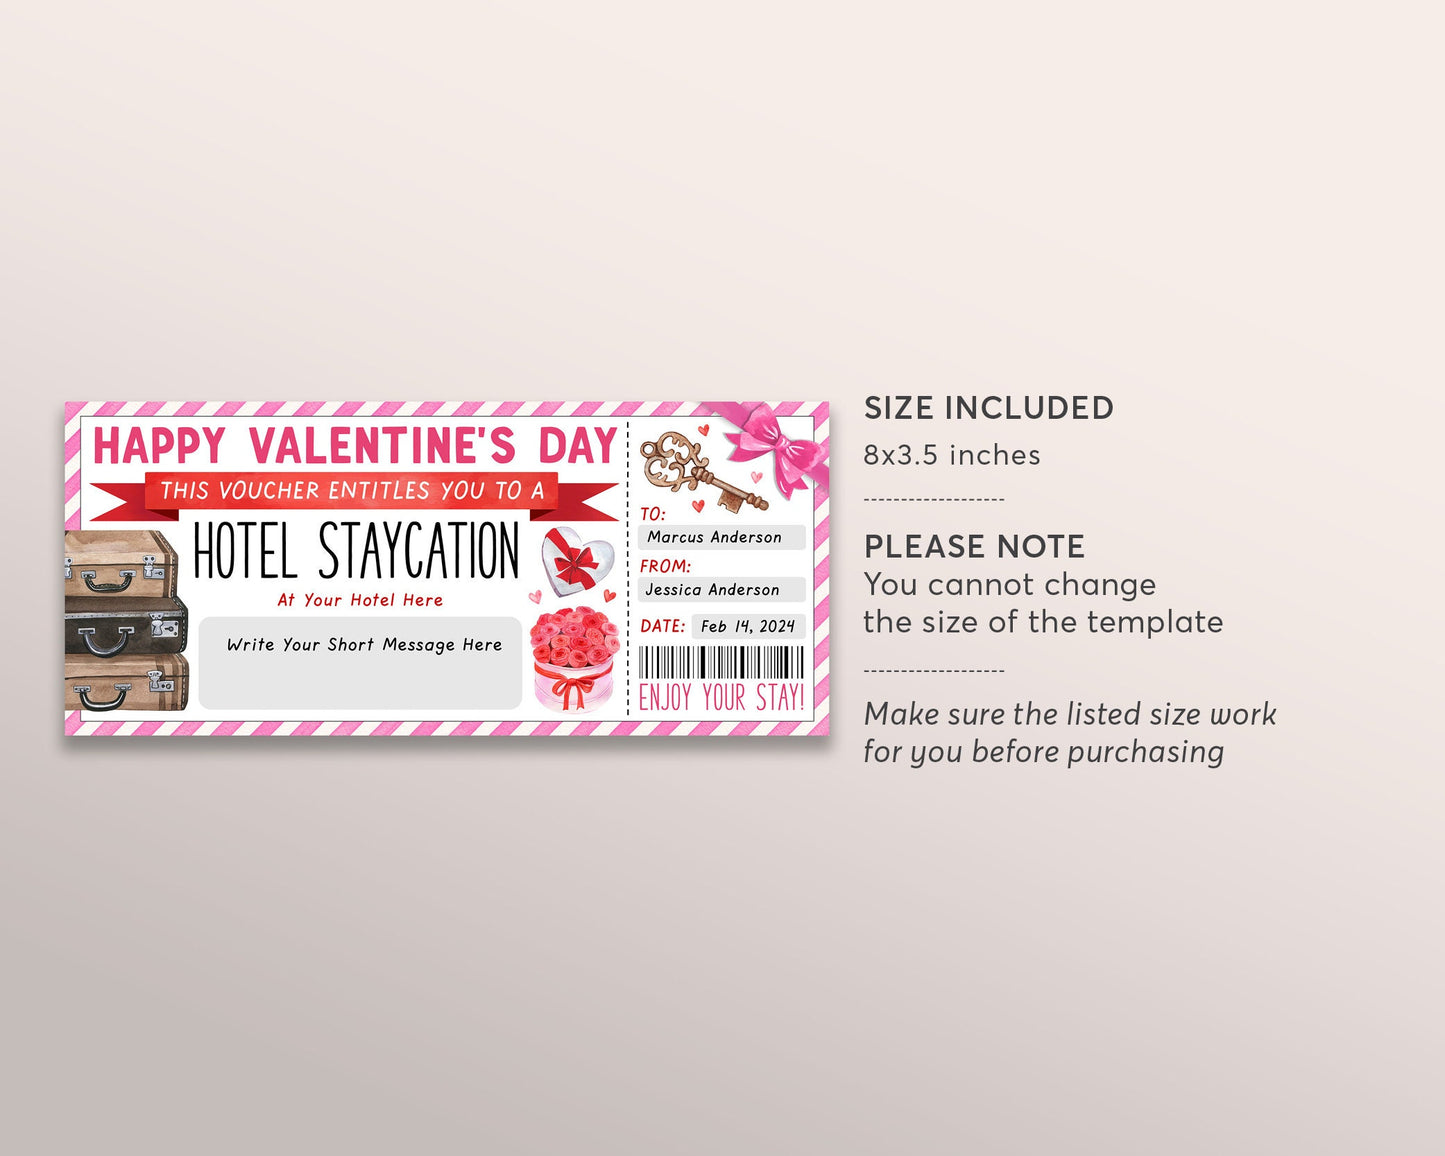 Valentines Day Hotel Staycation Voucher Editable Template, Anniversary Surprise Hotel Reservation, Getaway Hotel Ticket Gift Certificate